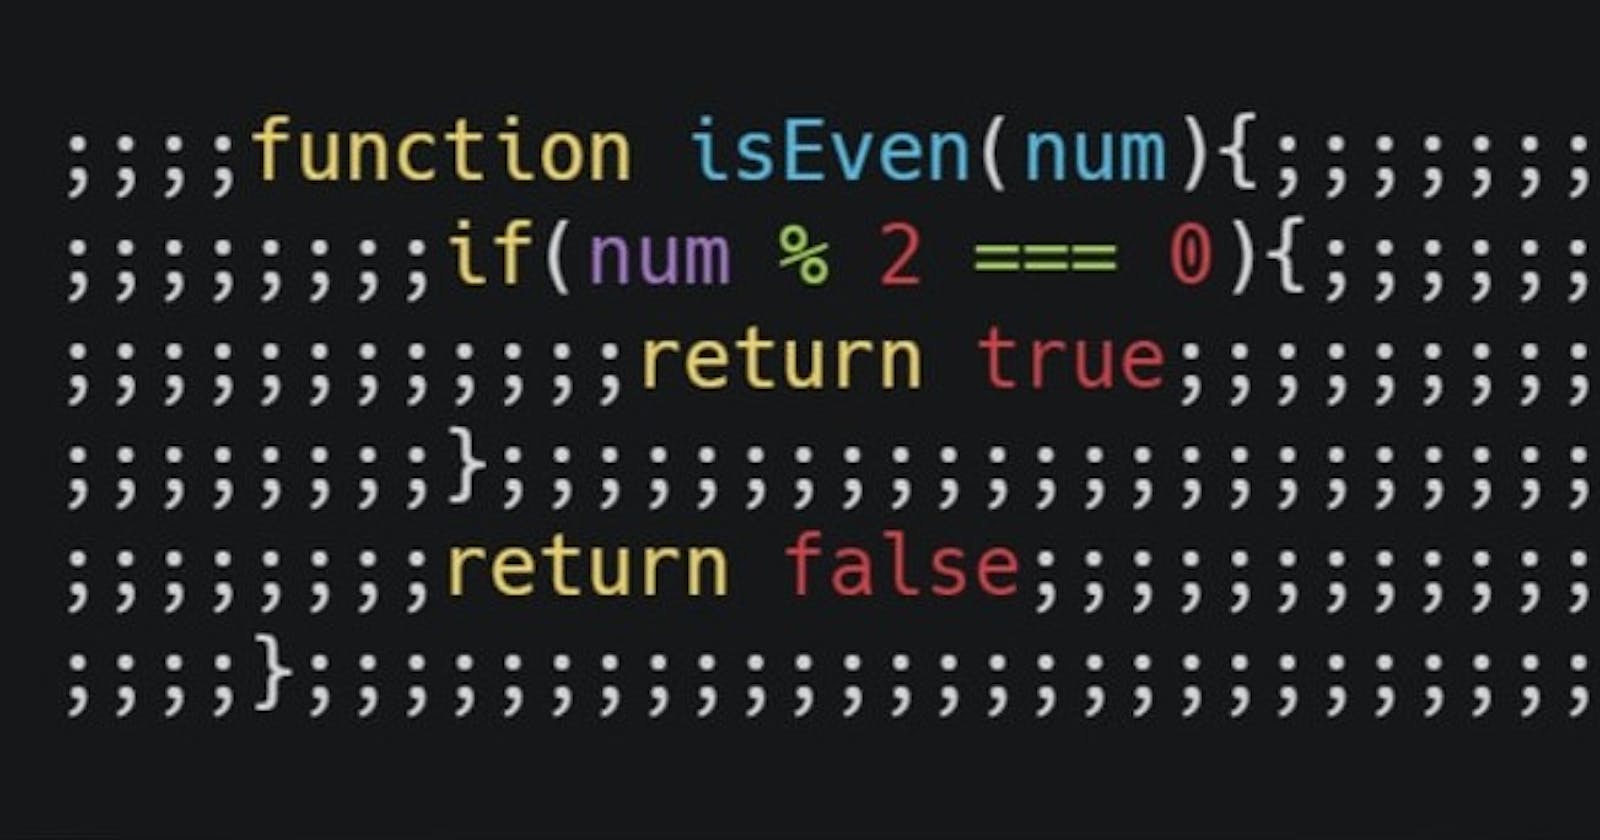 Why is this code valid